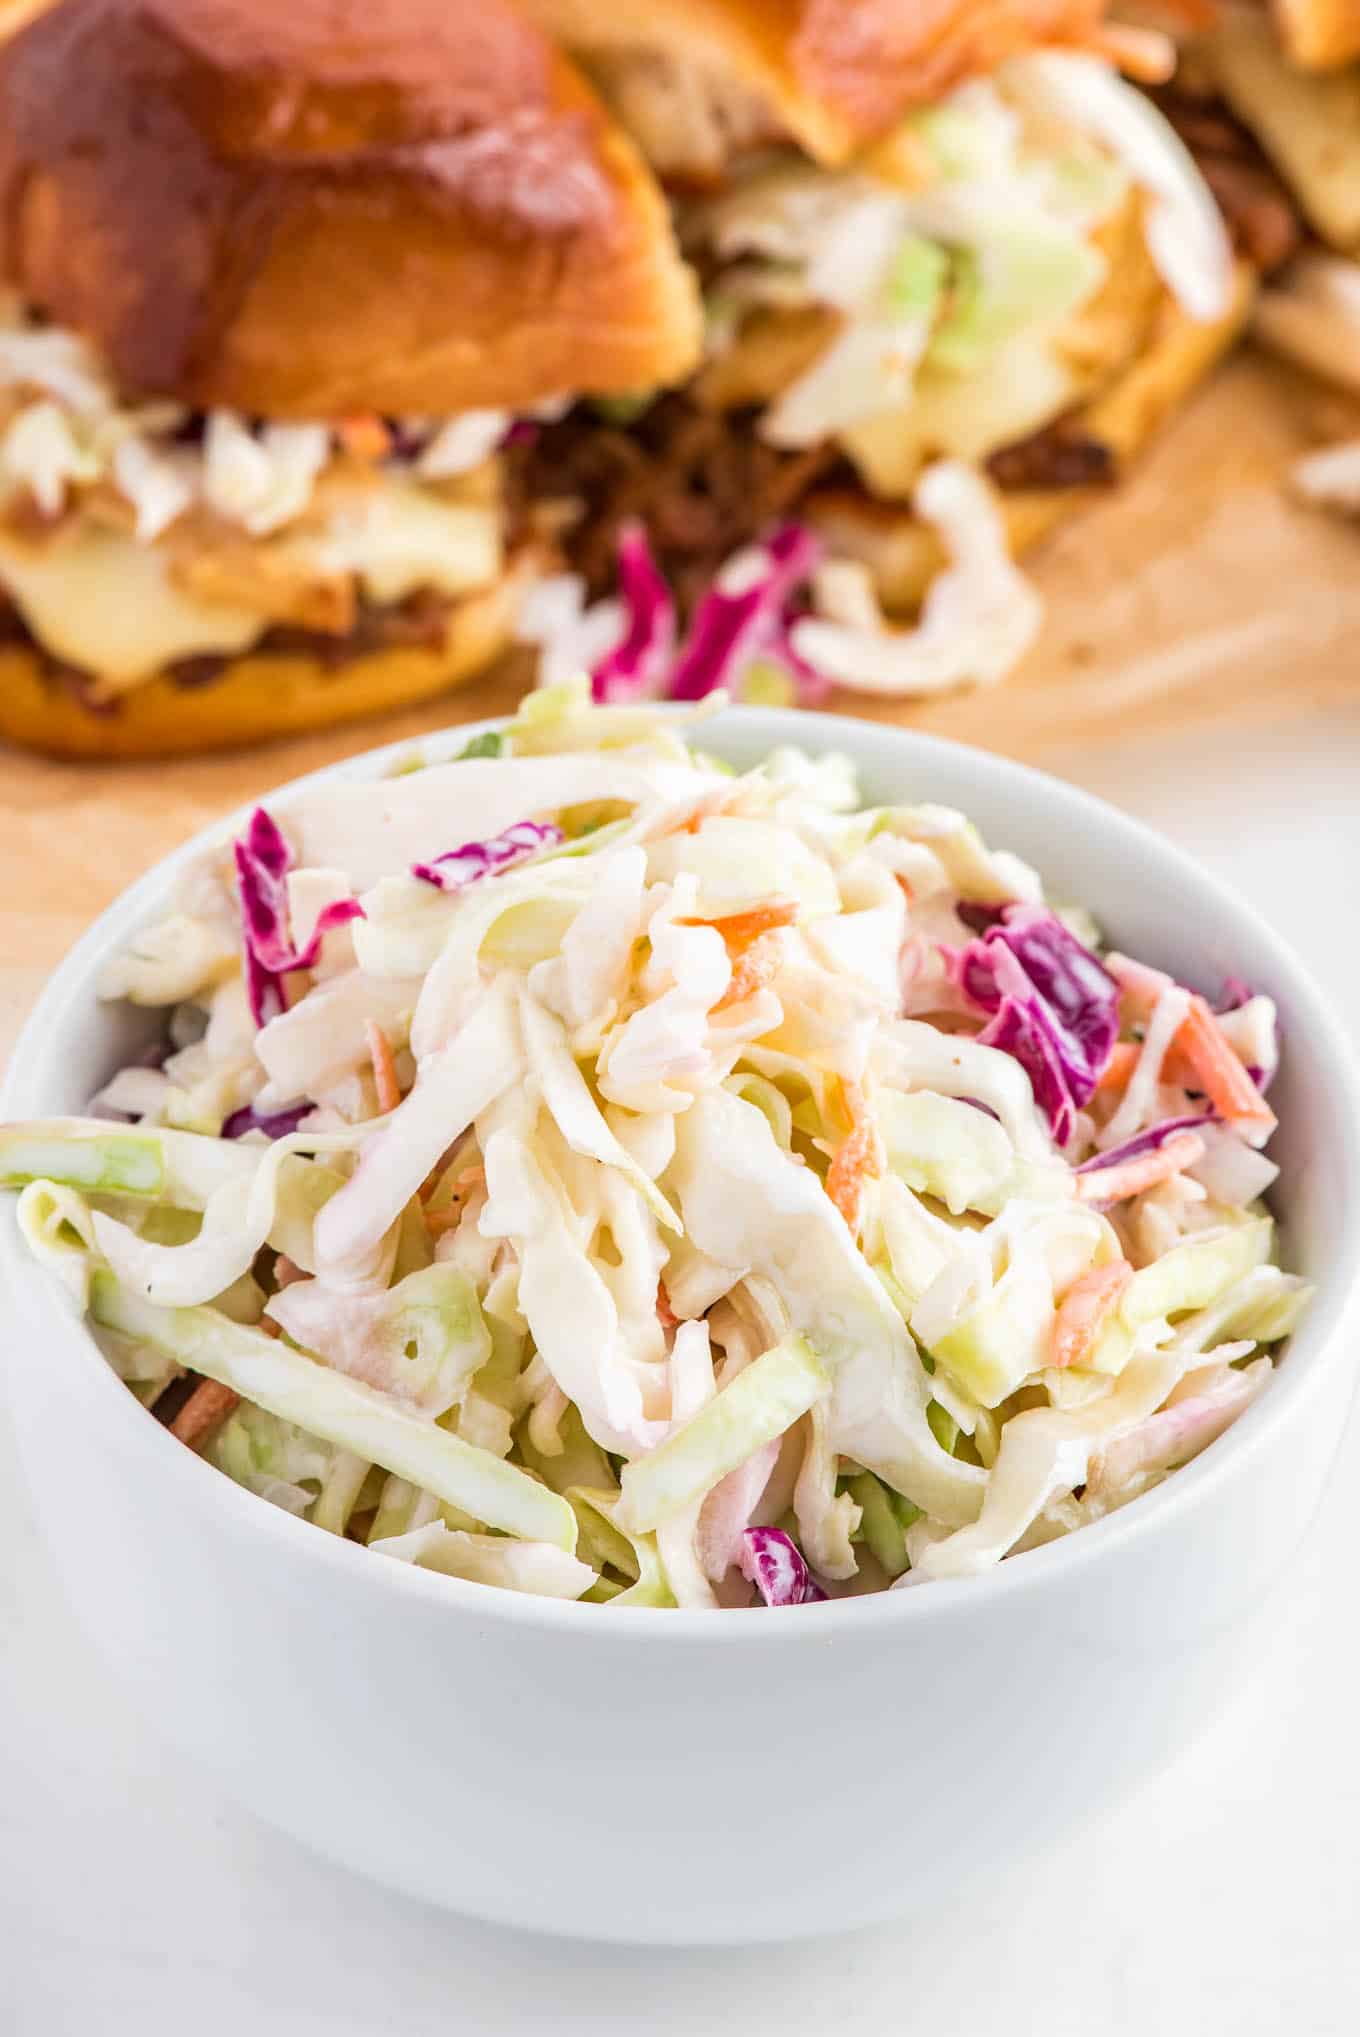 Coleslaw for pulled pork in a bowl in front of pork sliders in the background.